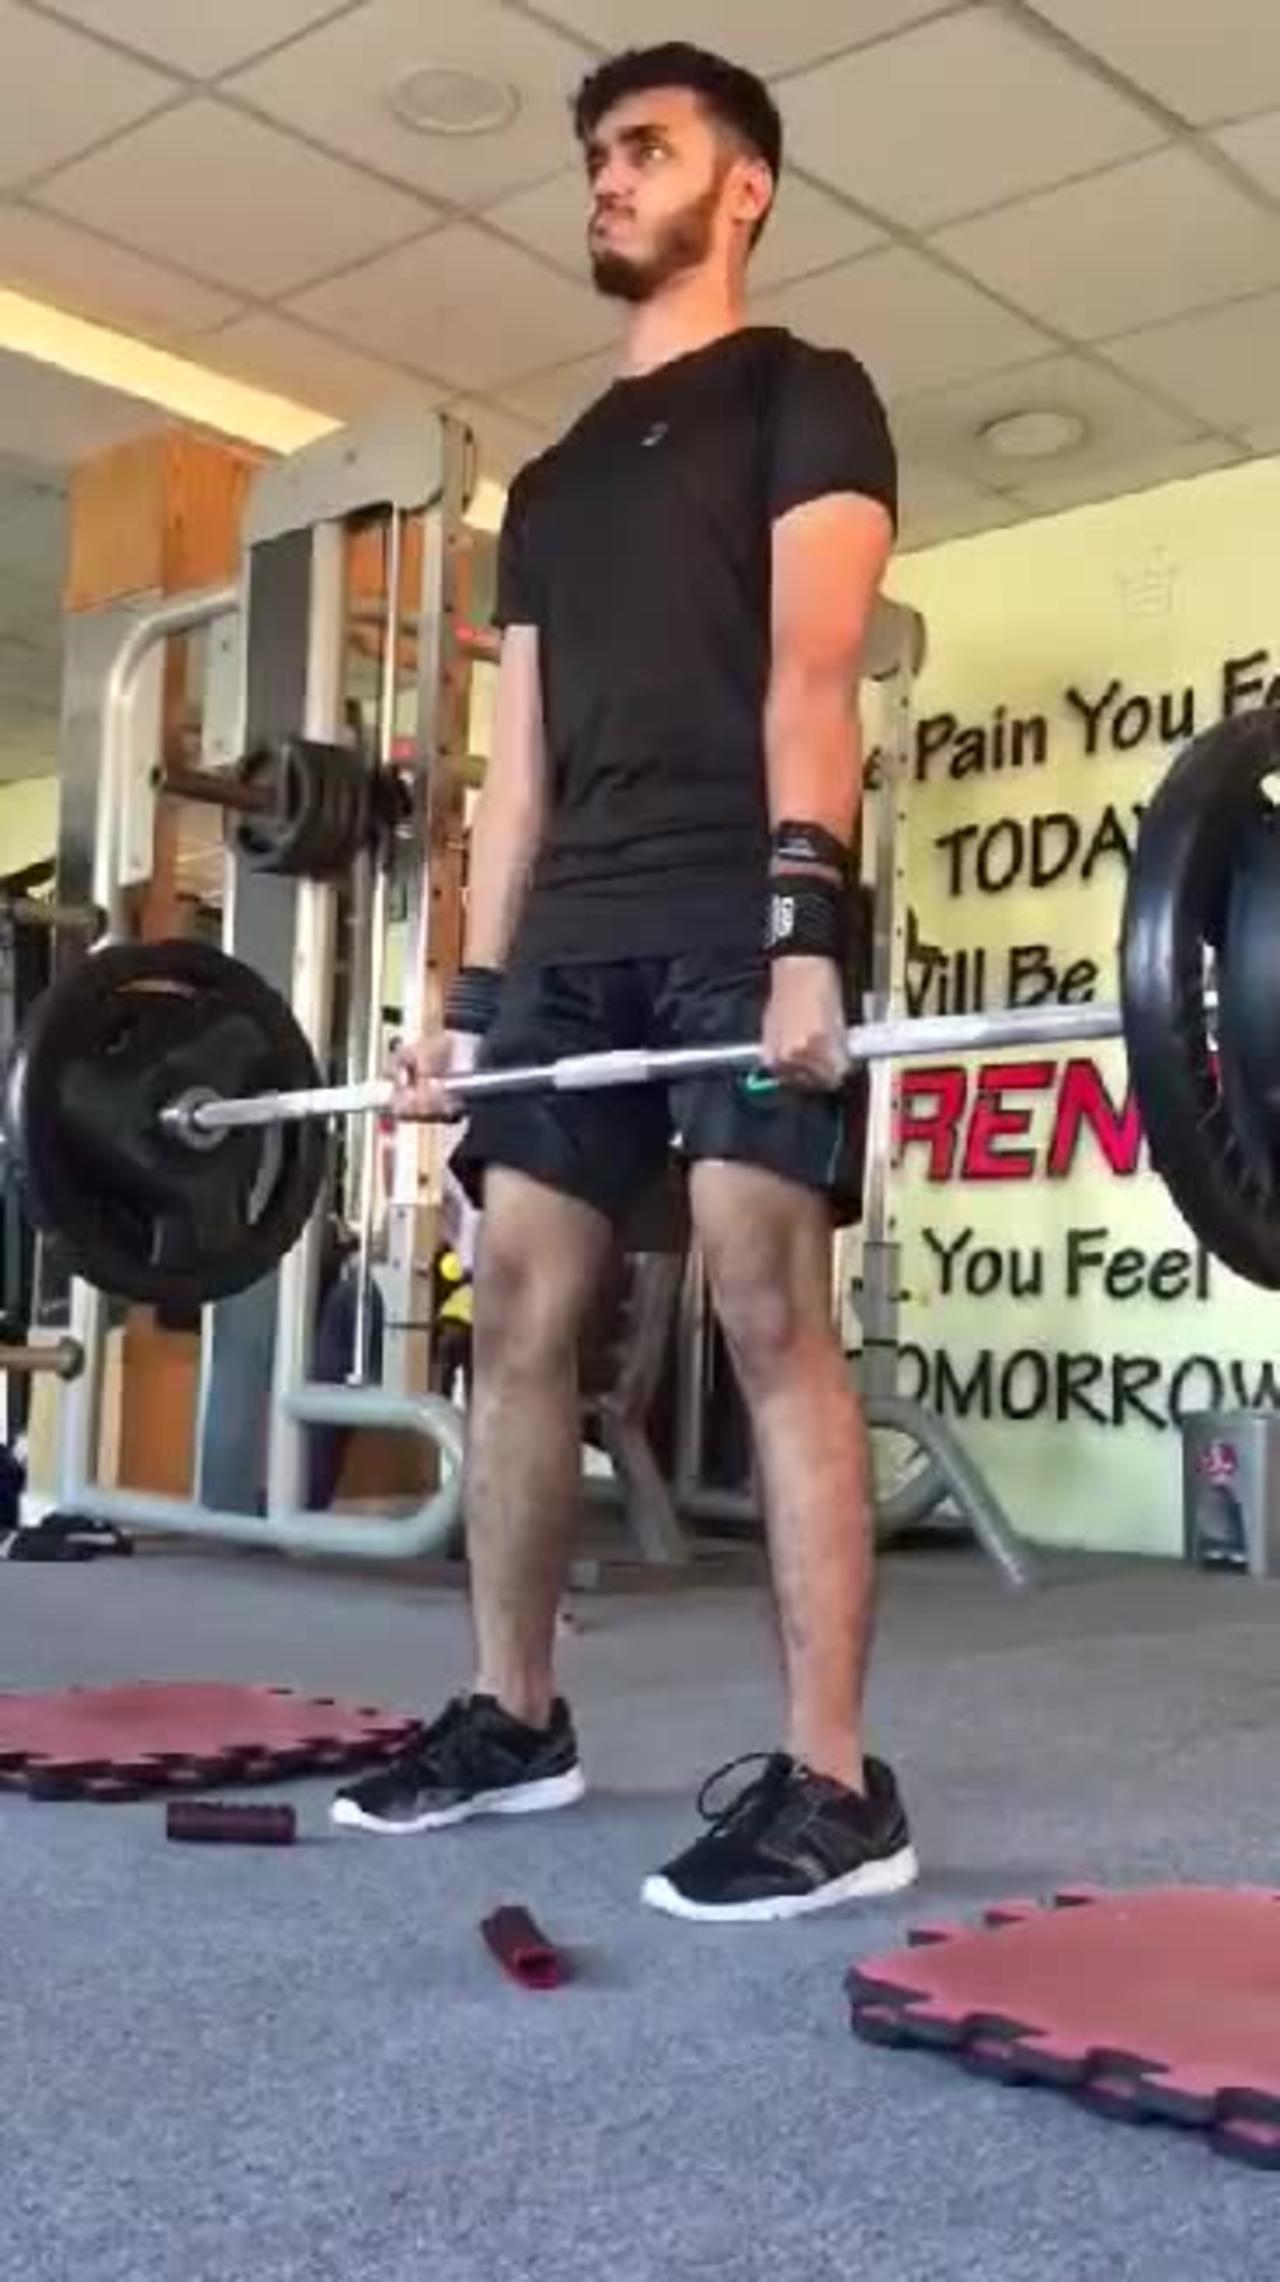 120 kg deadlift | weightlifting | gym | workout  | pr | personal Record | MR SMK